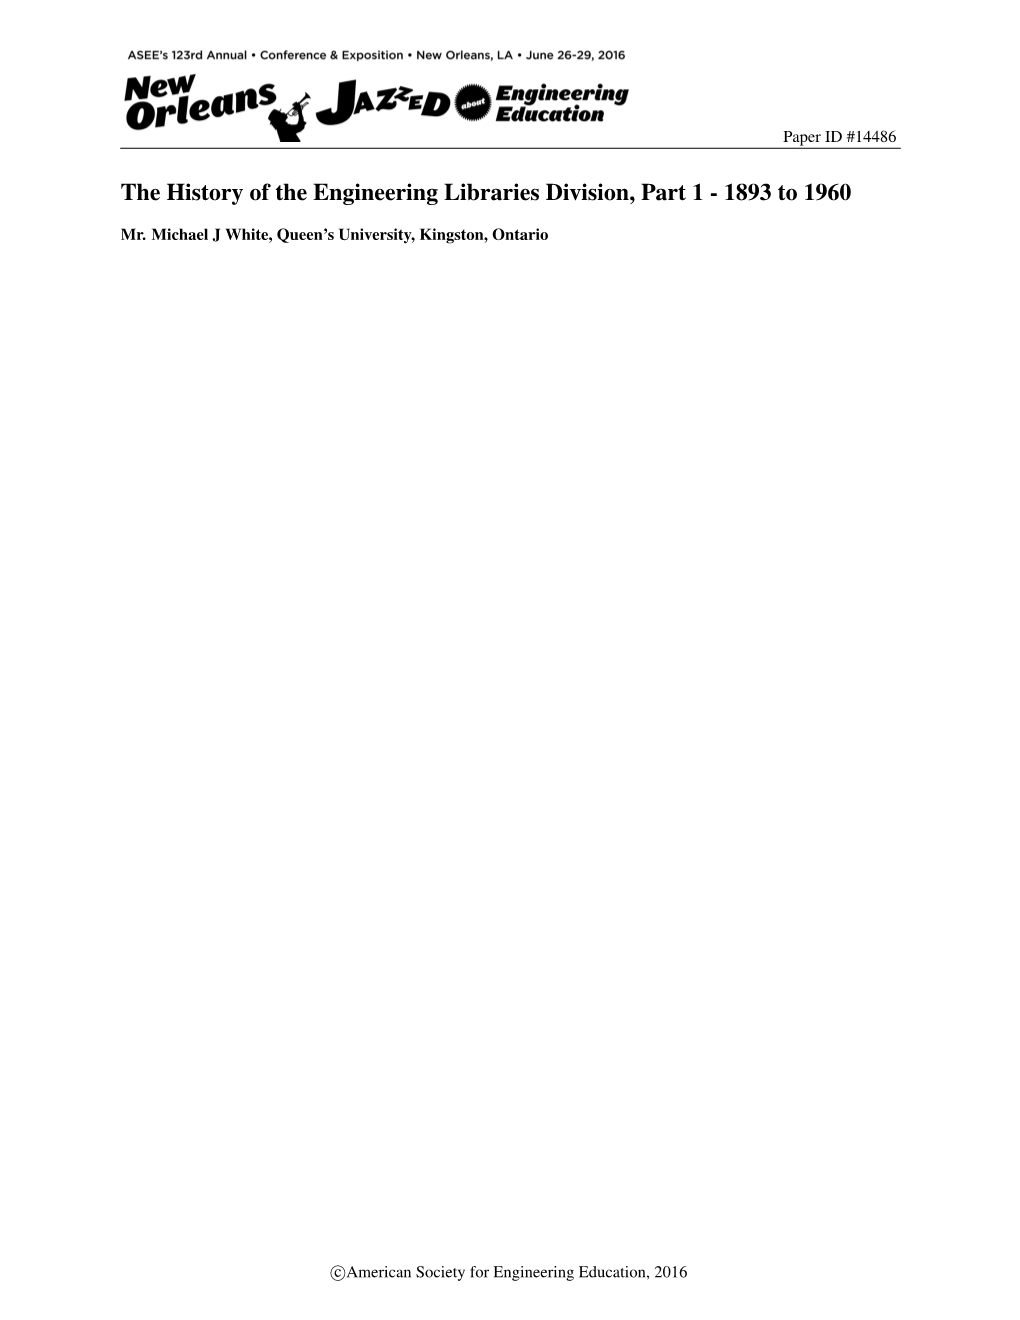 The History of the Engineering Libraries Division, Part 1 - 1893 to 1960